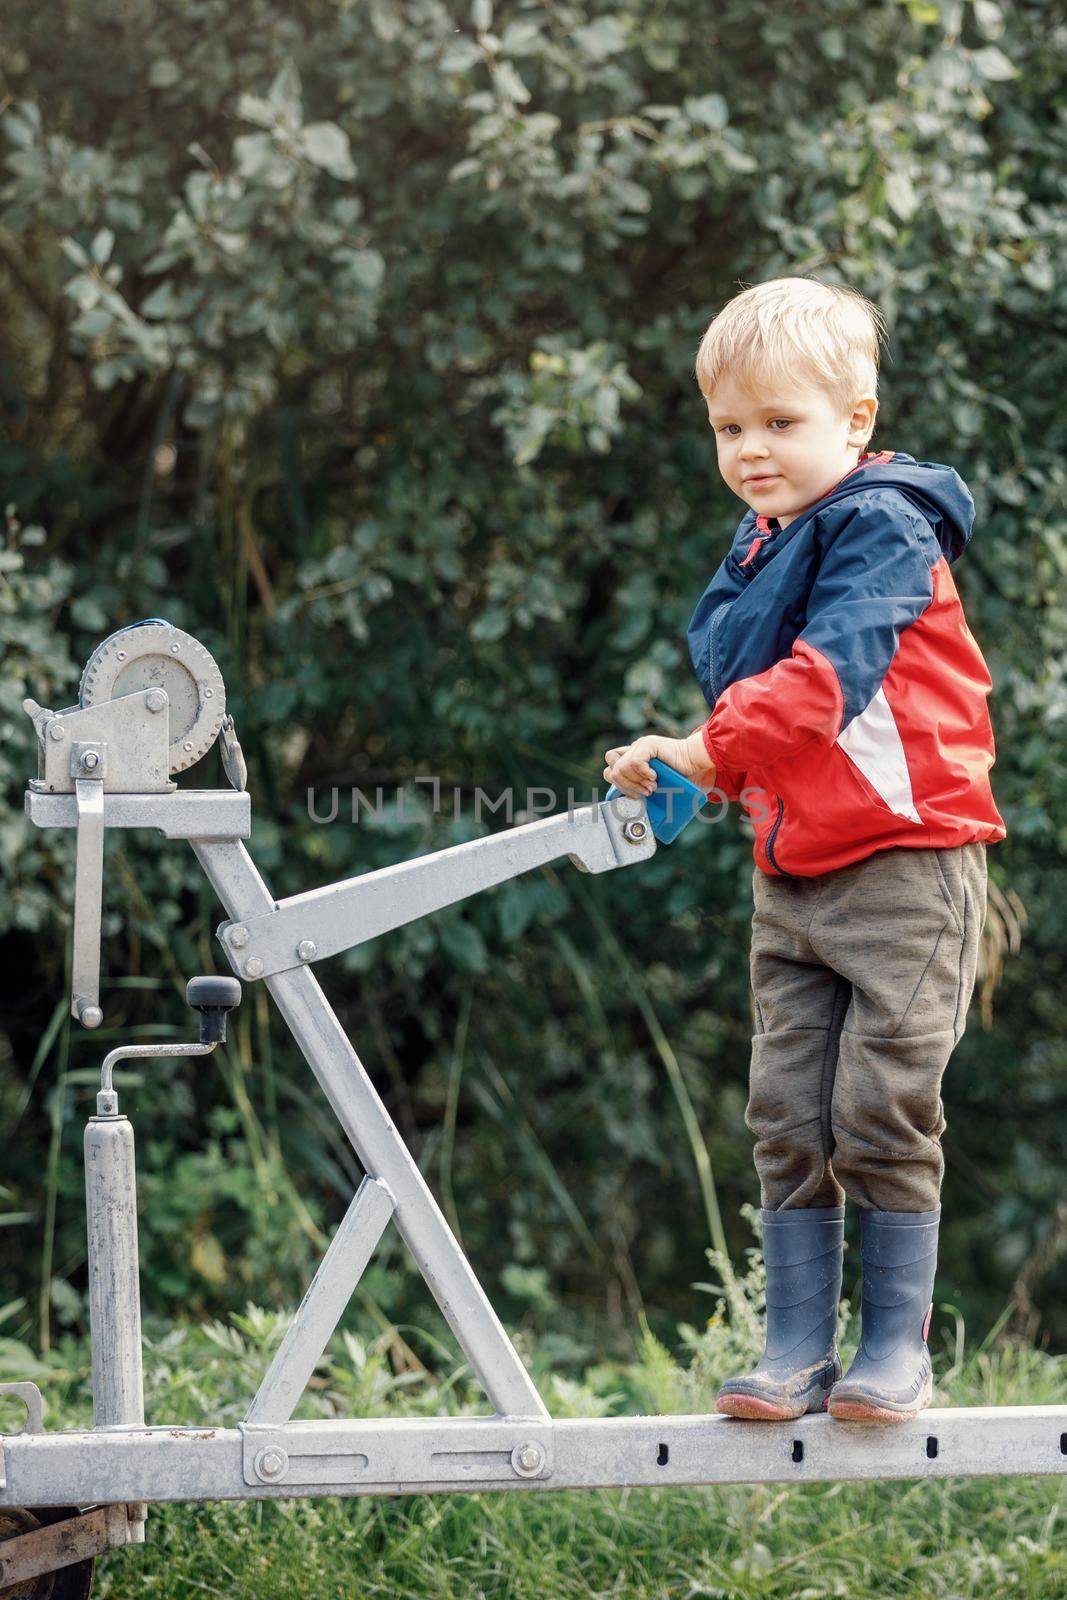 The little happy boy with rubber boots climbs on boat trailer winch and poses for the camera against a background of green foliage. Vertical photo by Lincikas